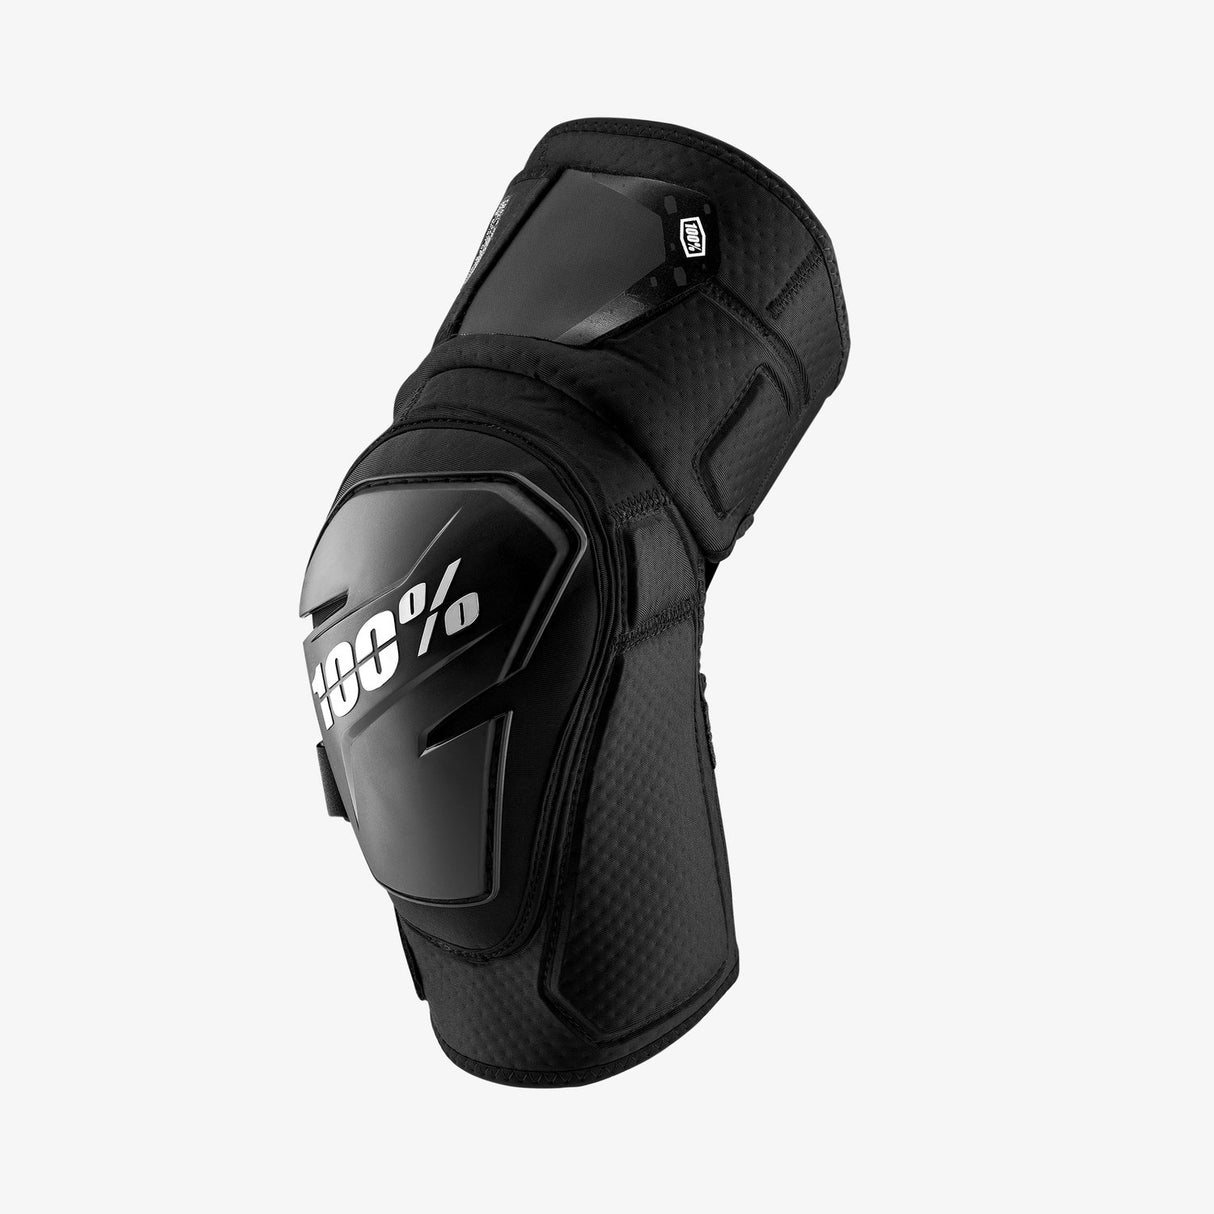 Ride 100% FORTIS Knee Guards/Pads, Color: Black- Size SM/MD Misc Full Catalog Ride 100%